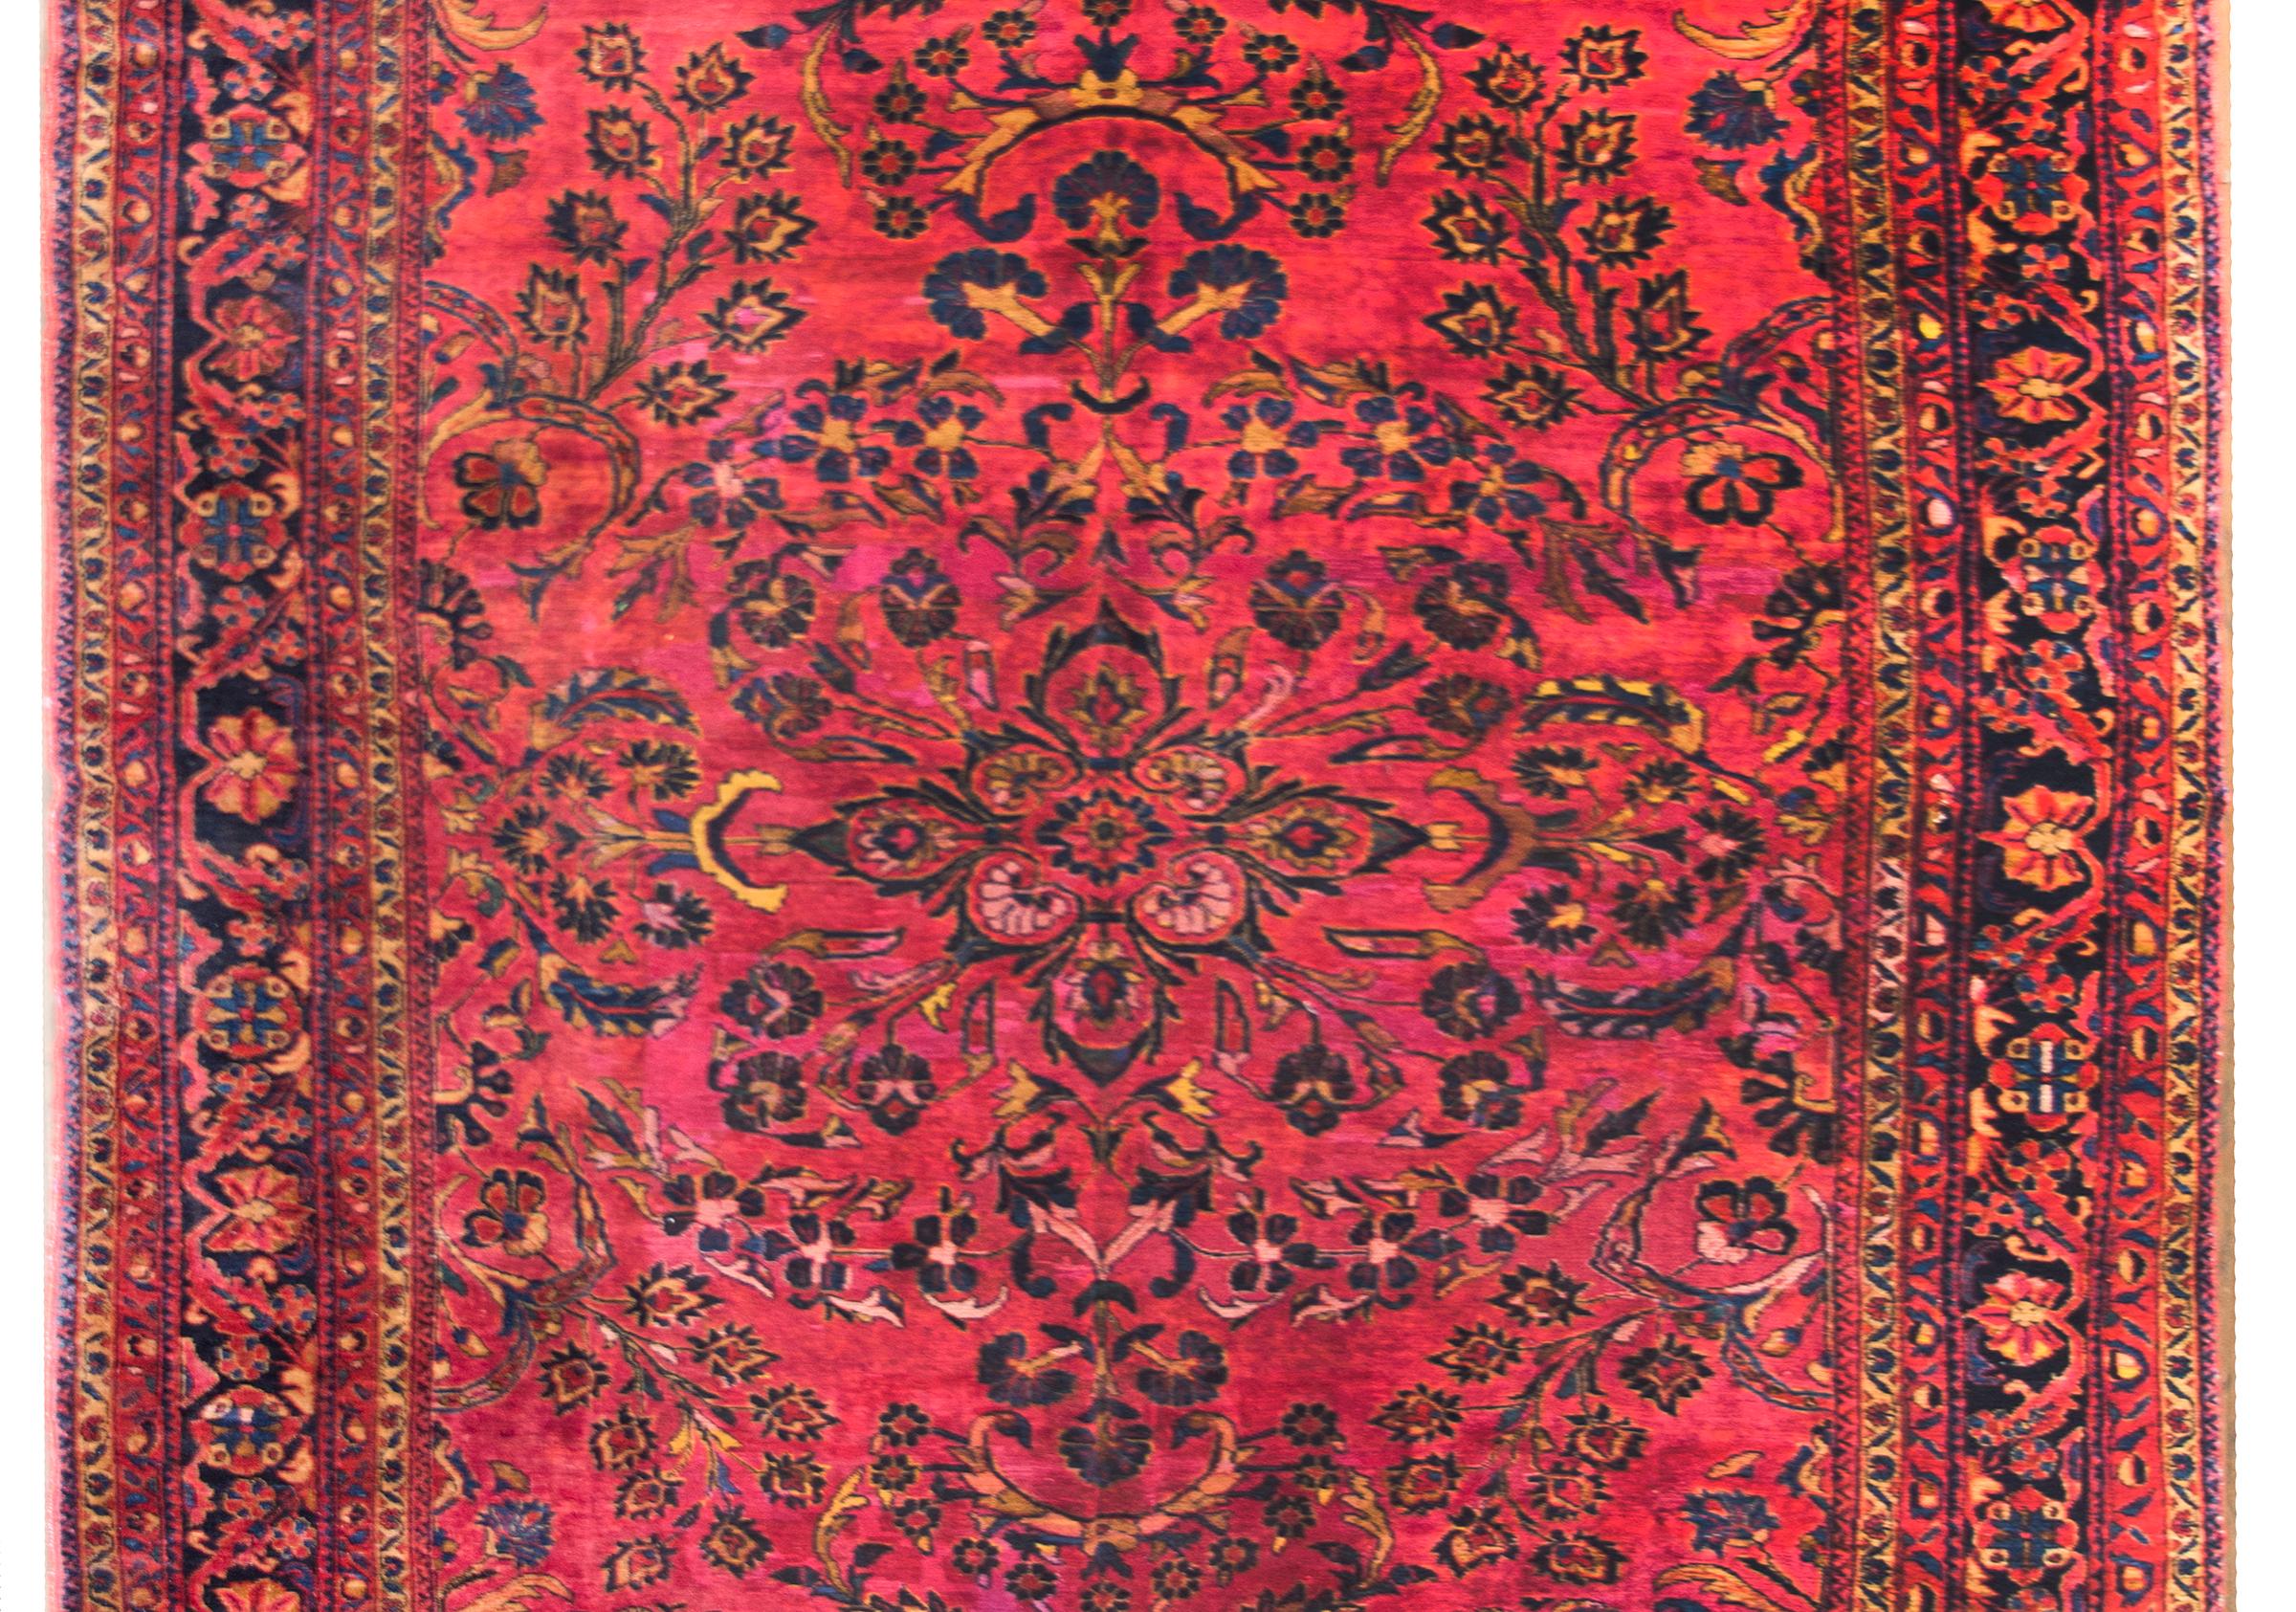 A beautiful early 20th century Persian Lilihan rug with a central floral medallion living amidst a field of more flowers and scrolling vines, surrounded by a complex border with a central repeated floral patterned stripe flanked by pairs of matching